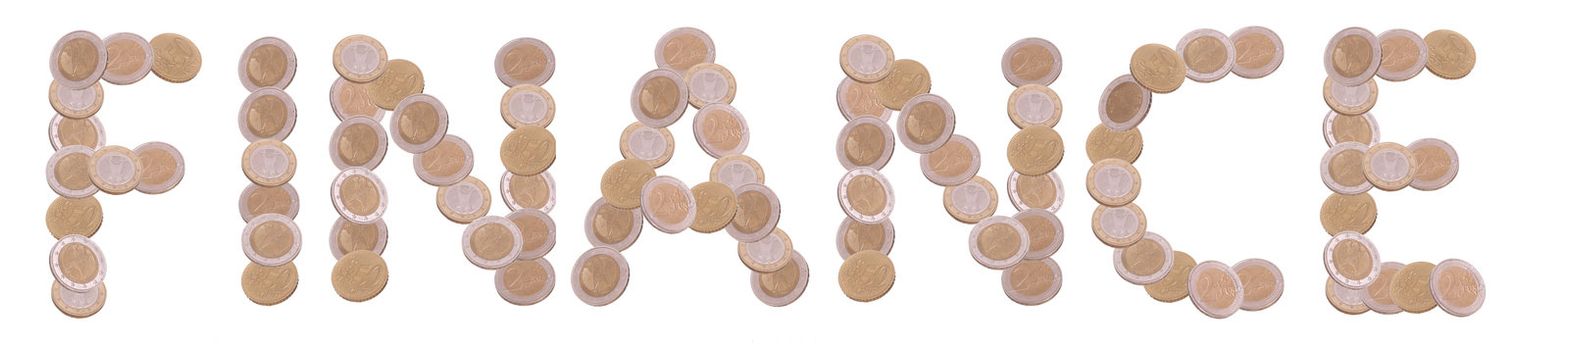 finance - written with coins on white background